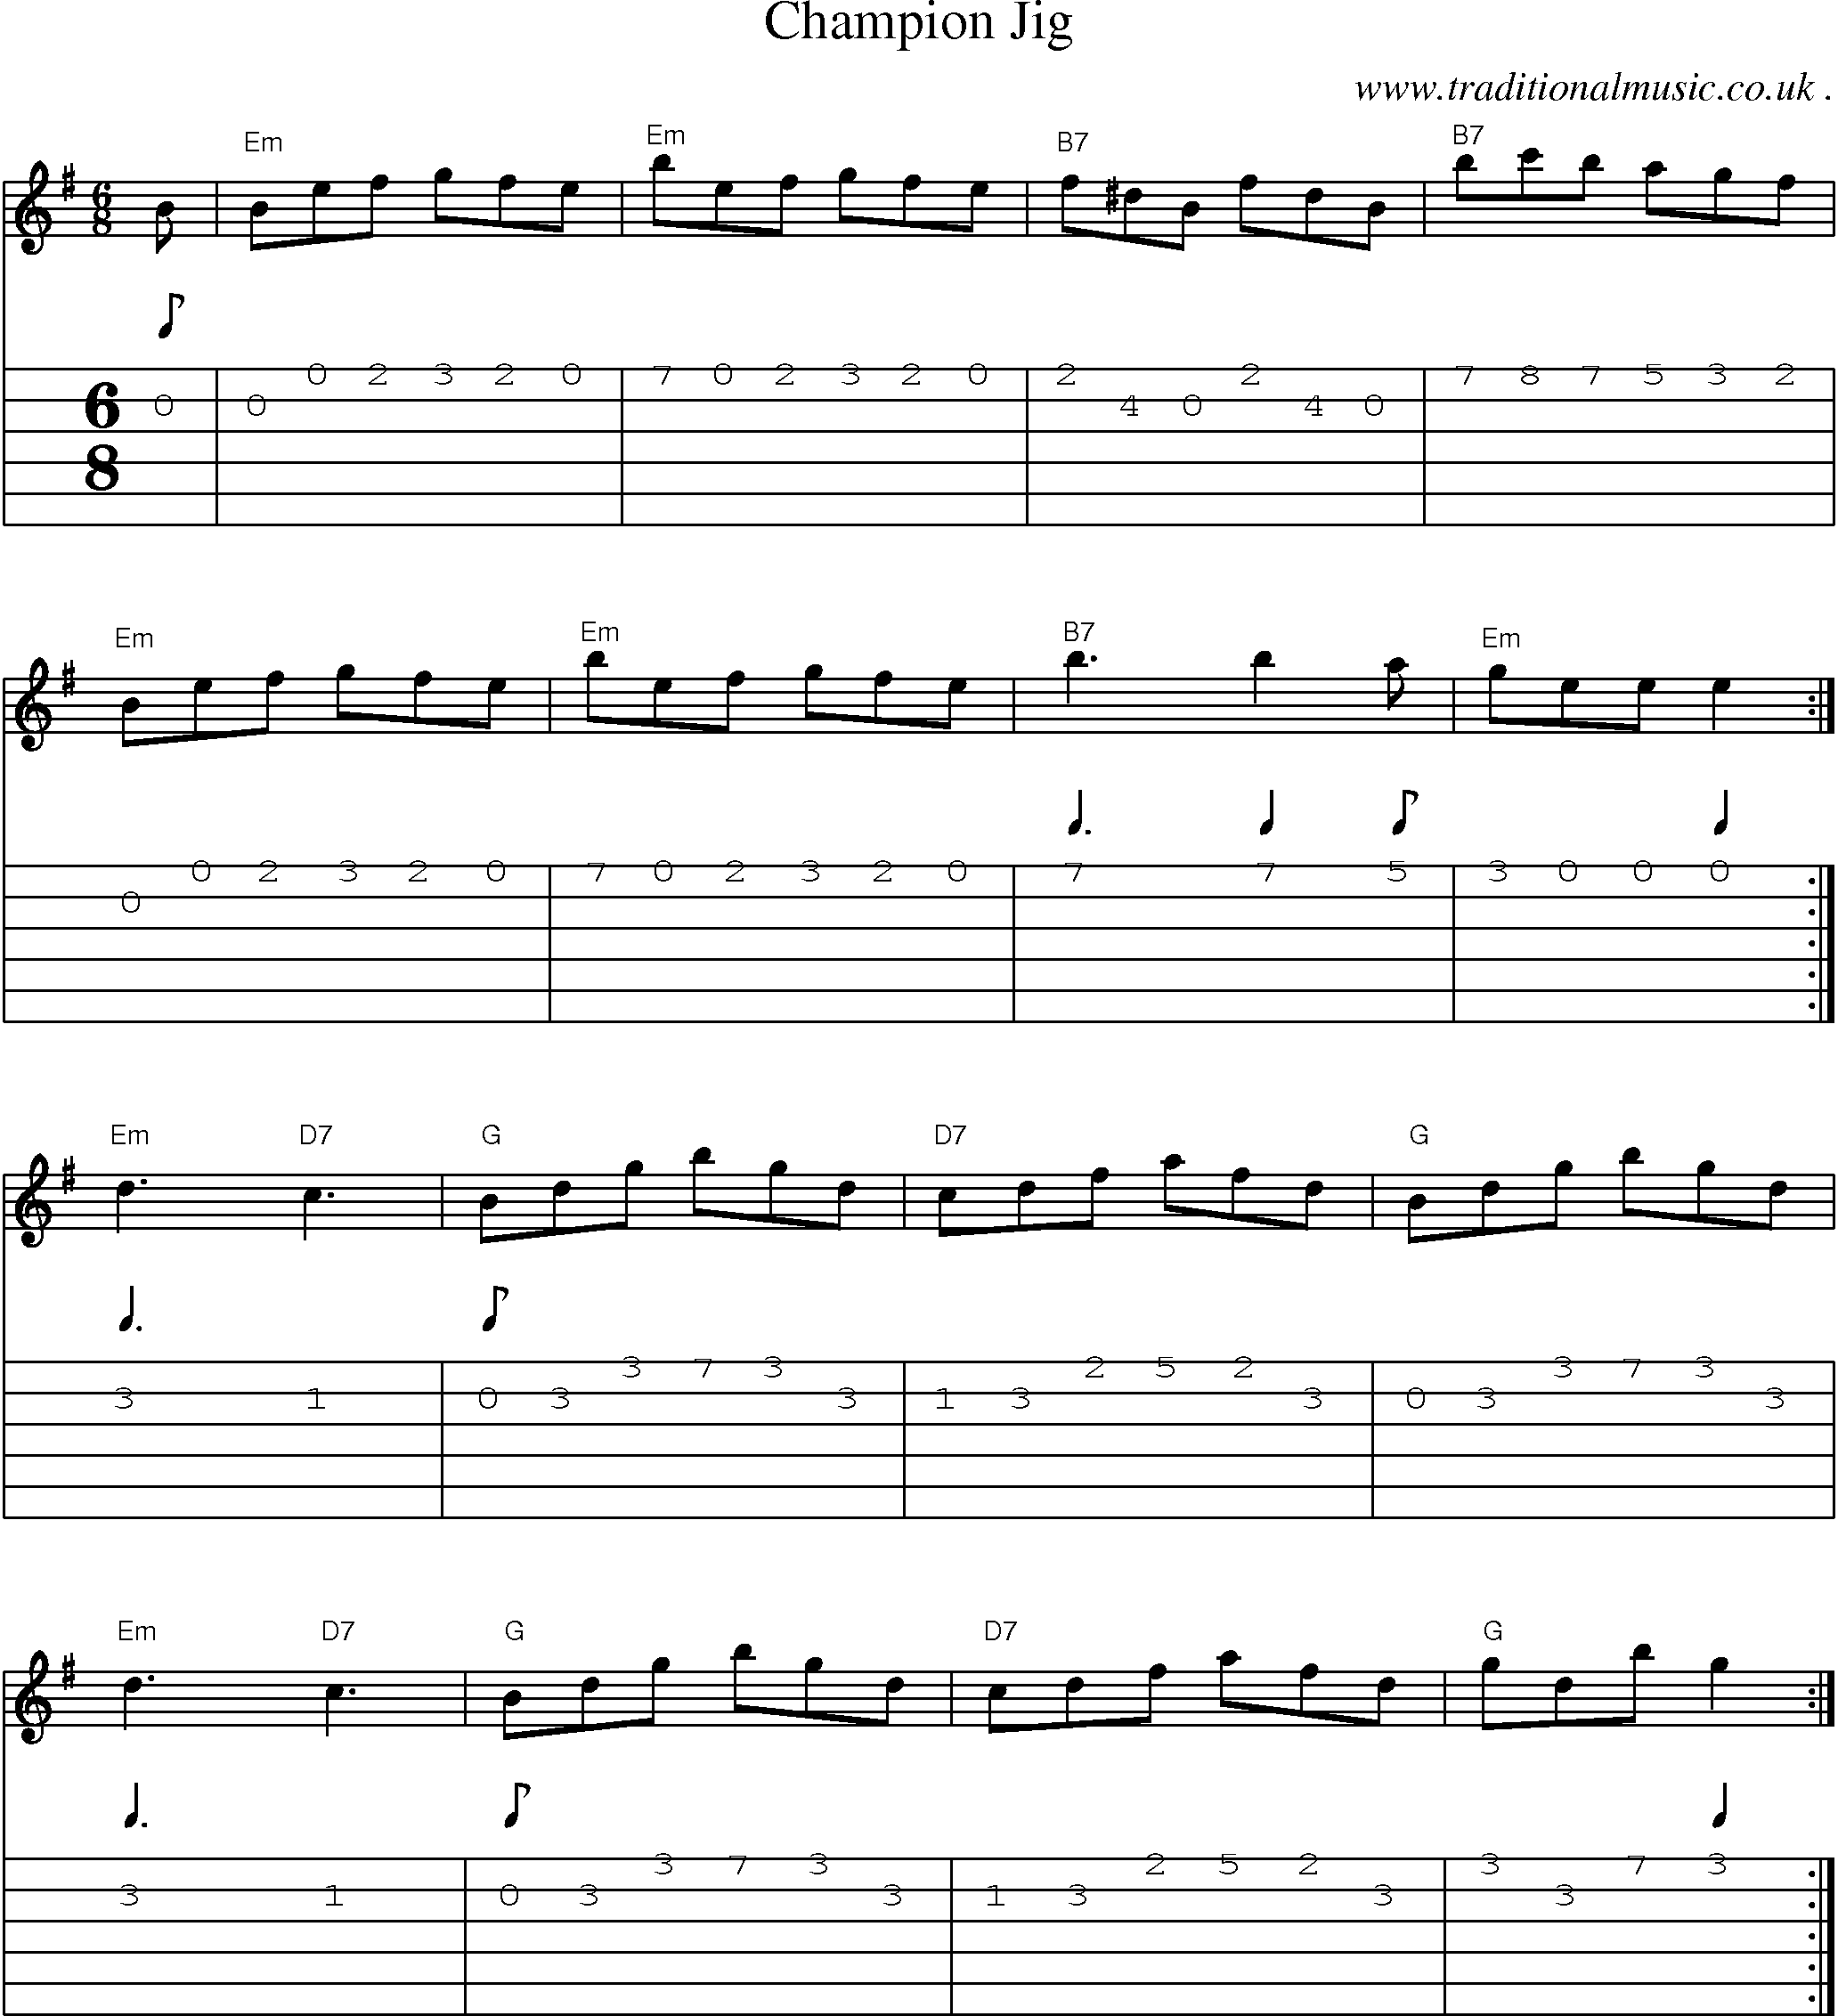 Sheet-Music and Guitar Tabs for Champion Jig